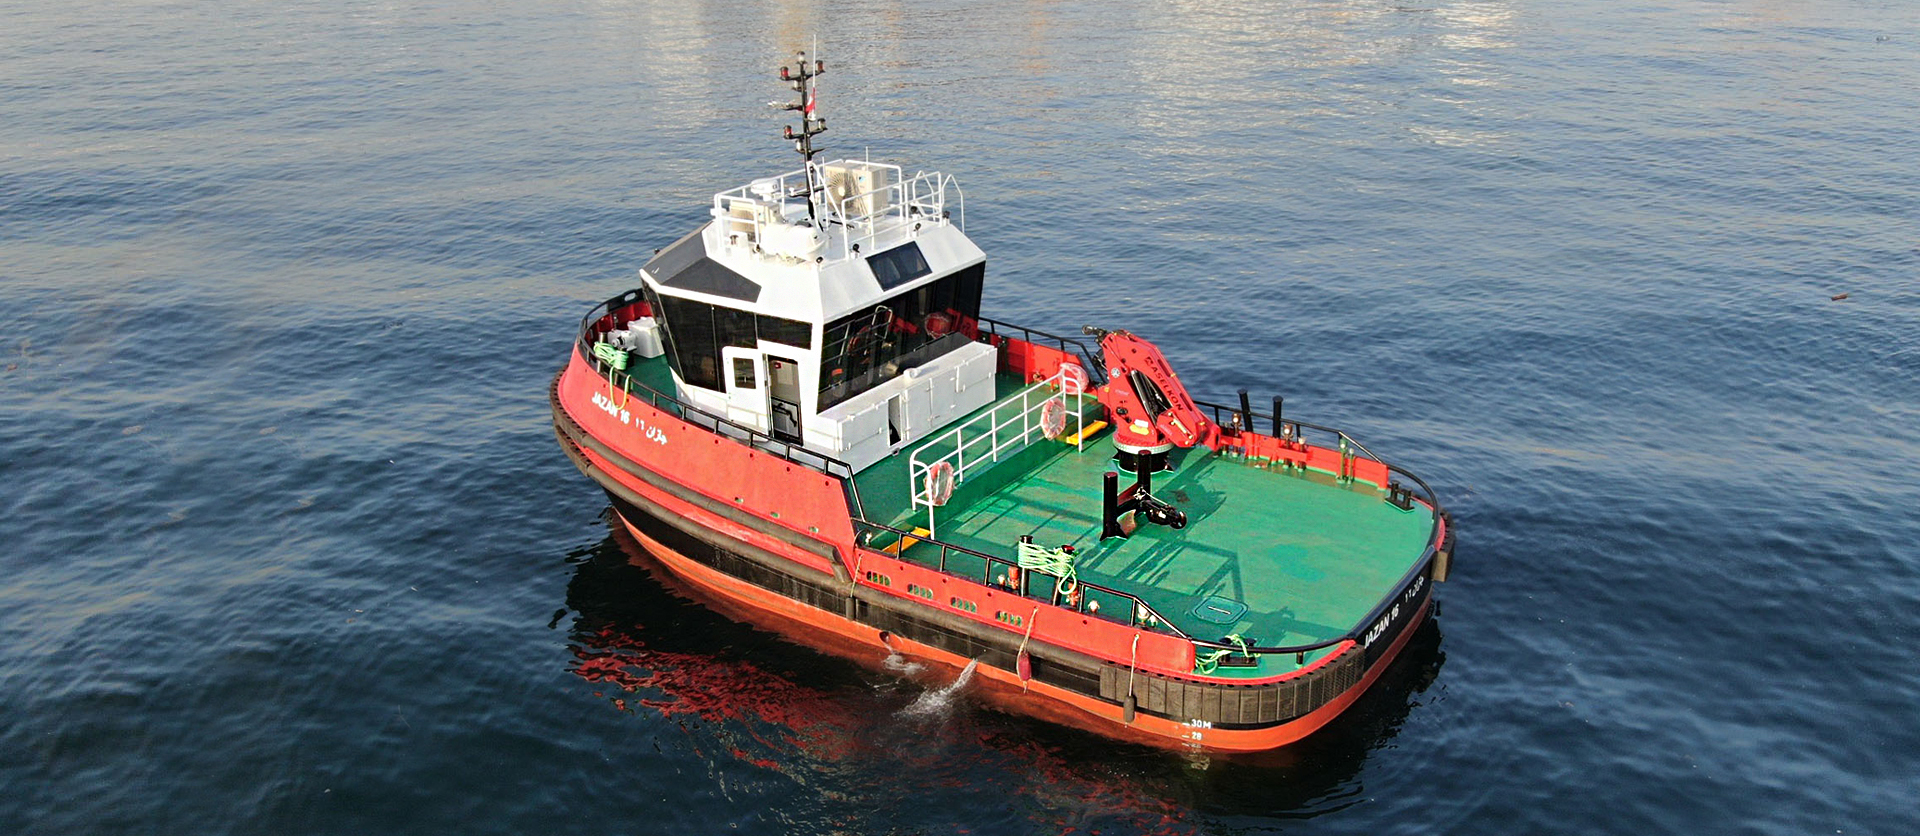 17M Multi-Purpose Tugboat Loyd Offers Different Type Of Military Vessels ; Patrol Boat , Rescue Boat, Anti Piracy Boat , Rib , Landing Craft . Standard Dimensions For Military Boats; From Loa:7 Meters To Loa:24 Meters. Our Standard Equipments; As Main Engines Man , Cummins , Doosan , Caterpillar , Yanmar , Iveco , Scania , Volvo , Baudouin , Mitsubishi , Mercury. As Gear Box ; Zf , Dongi , Twindisc .